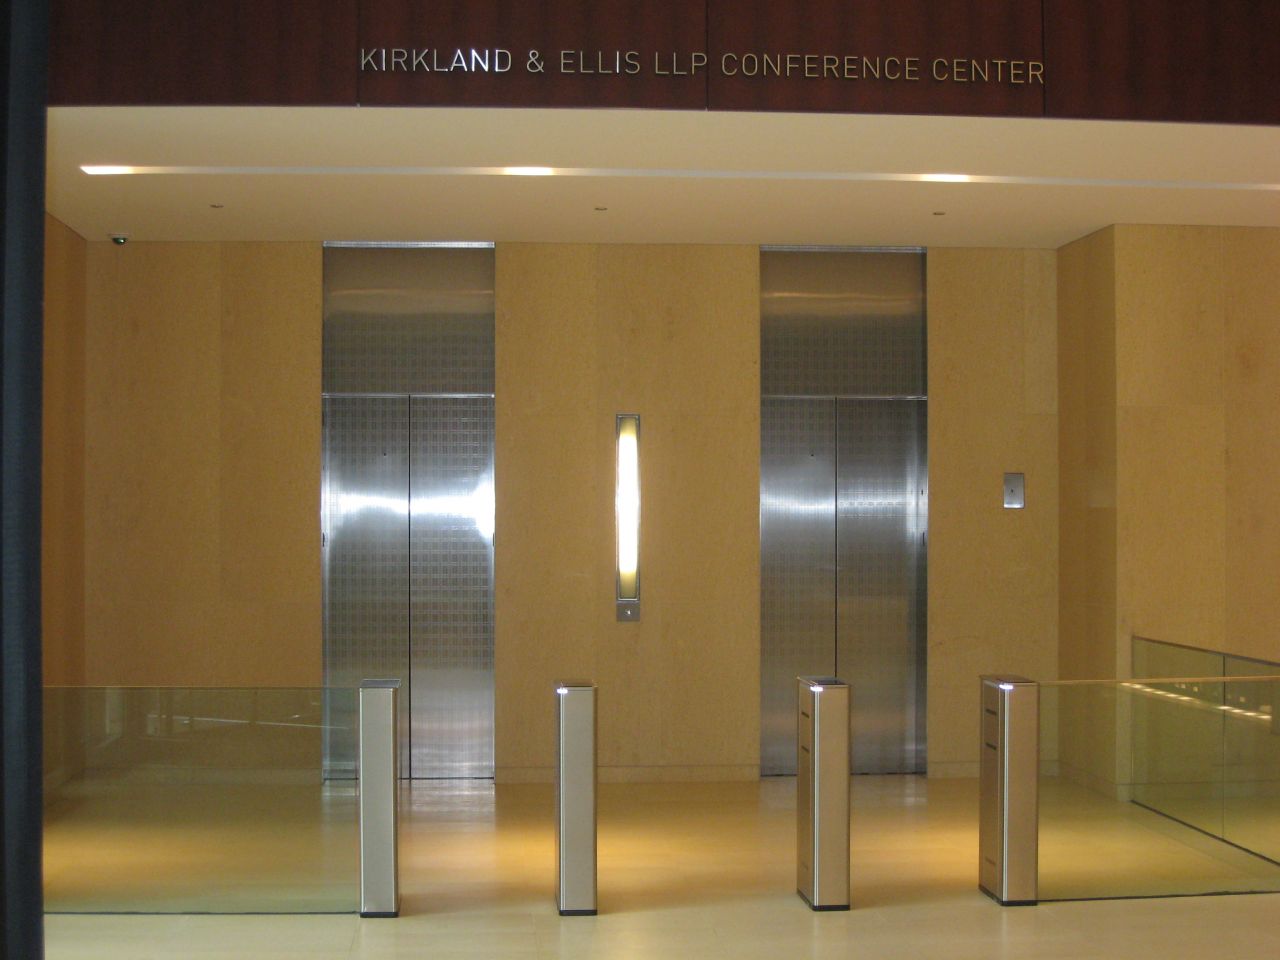 Elevator entrance for guests on the first floor.